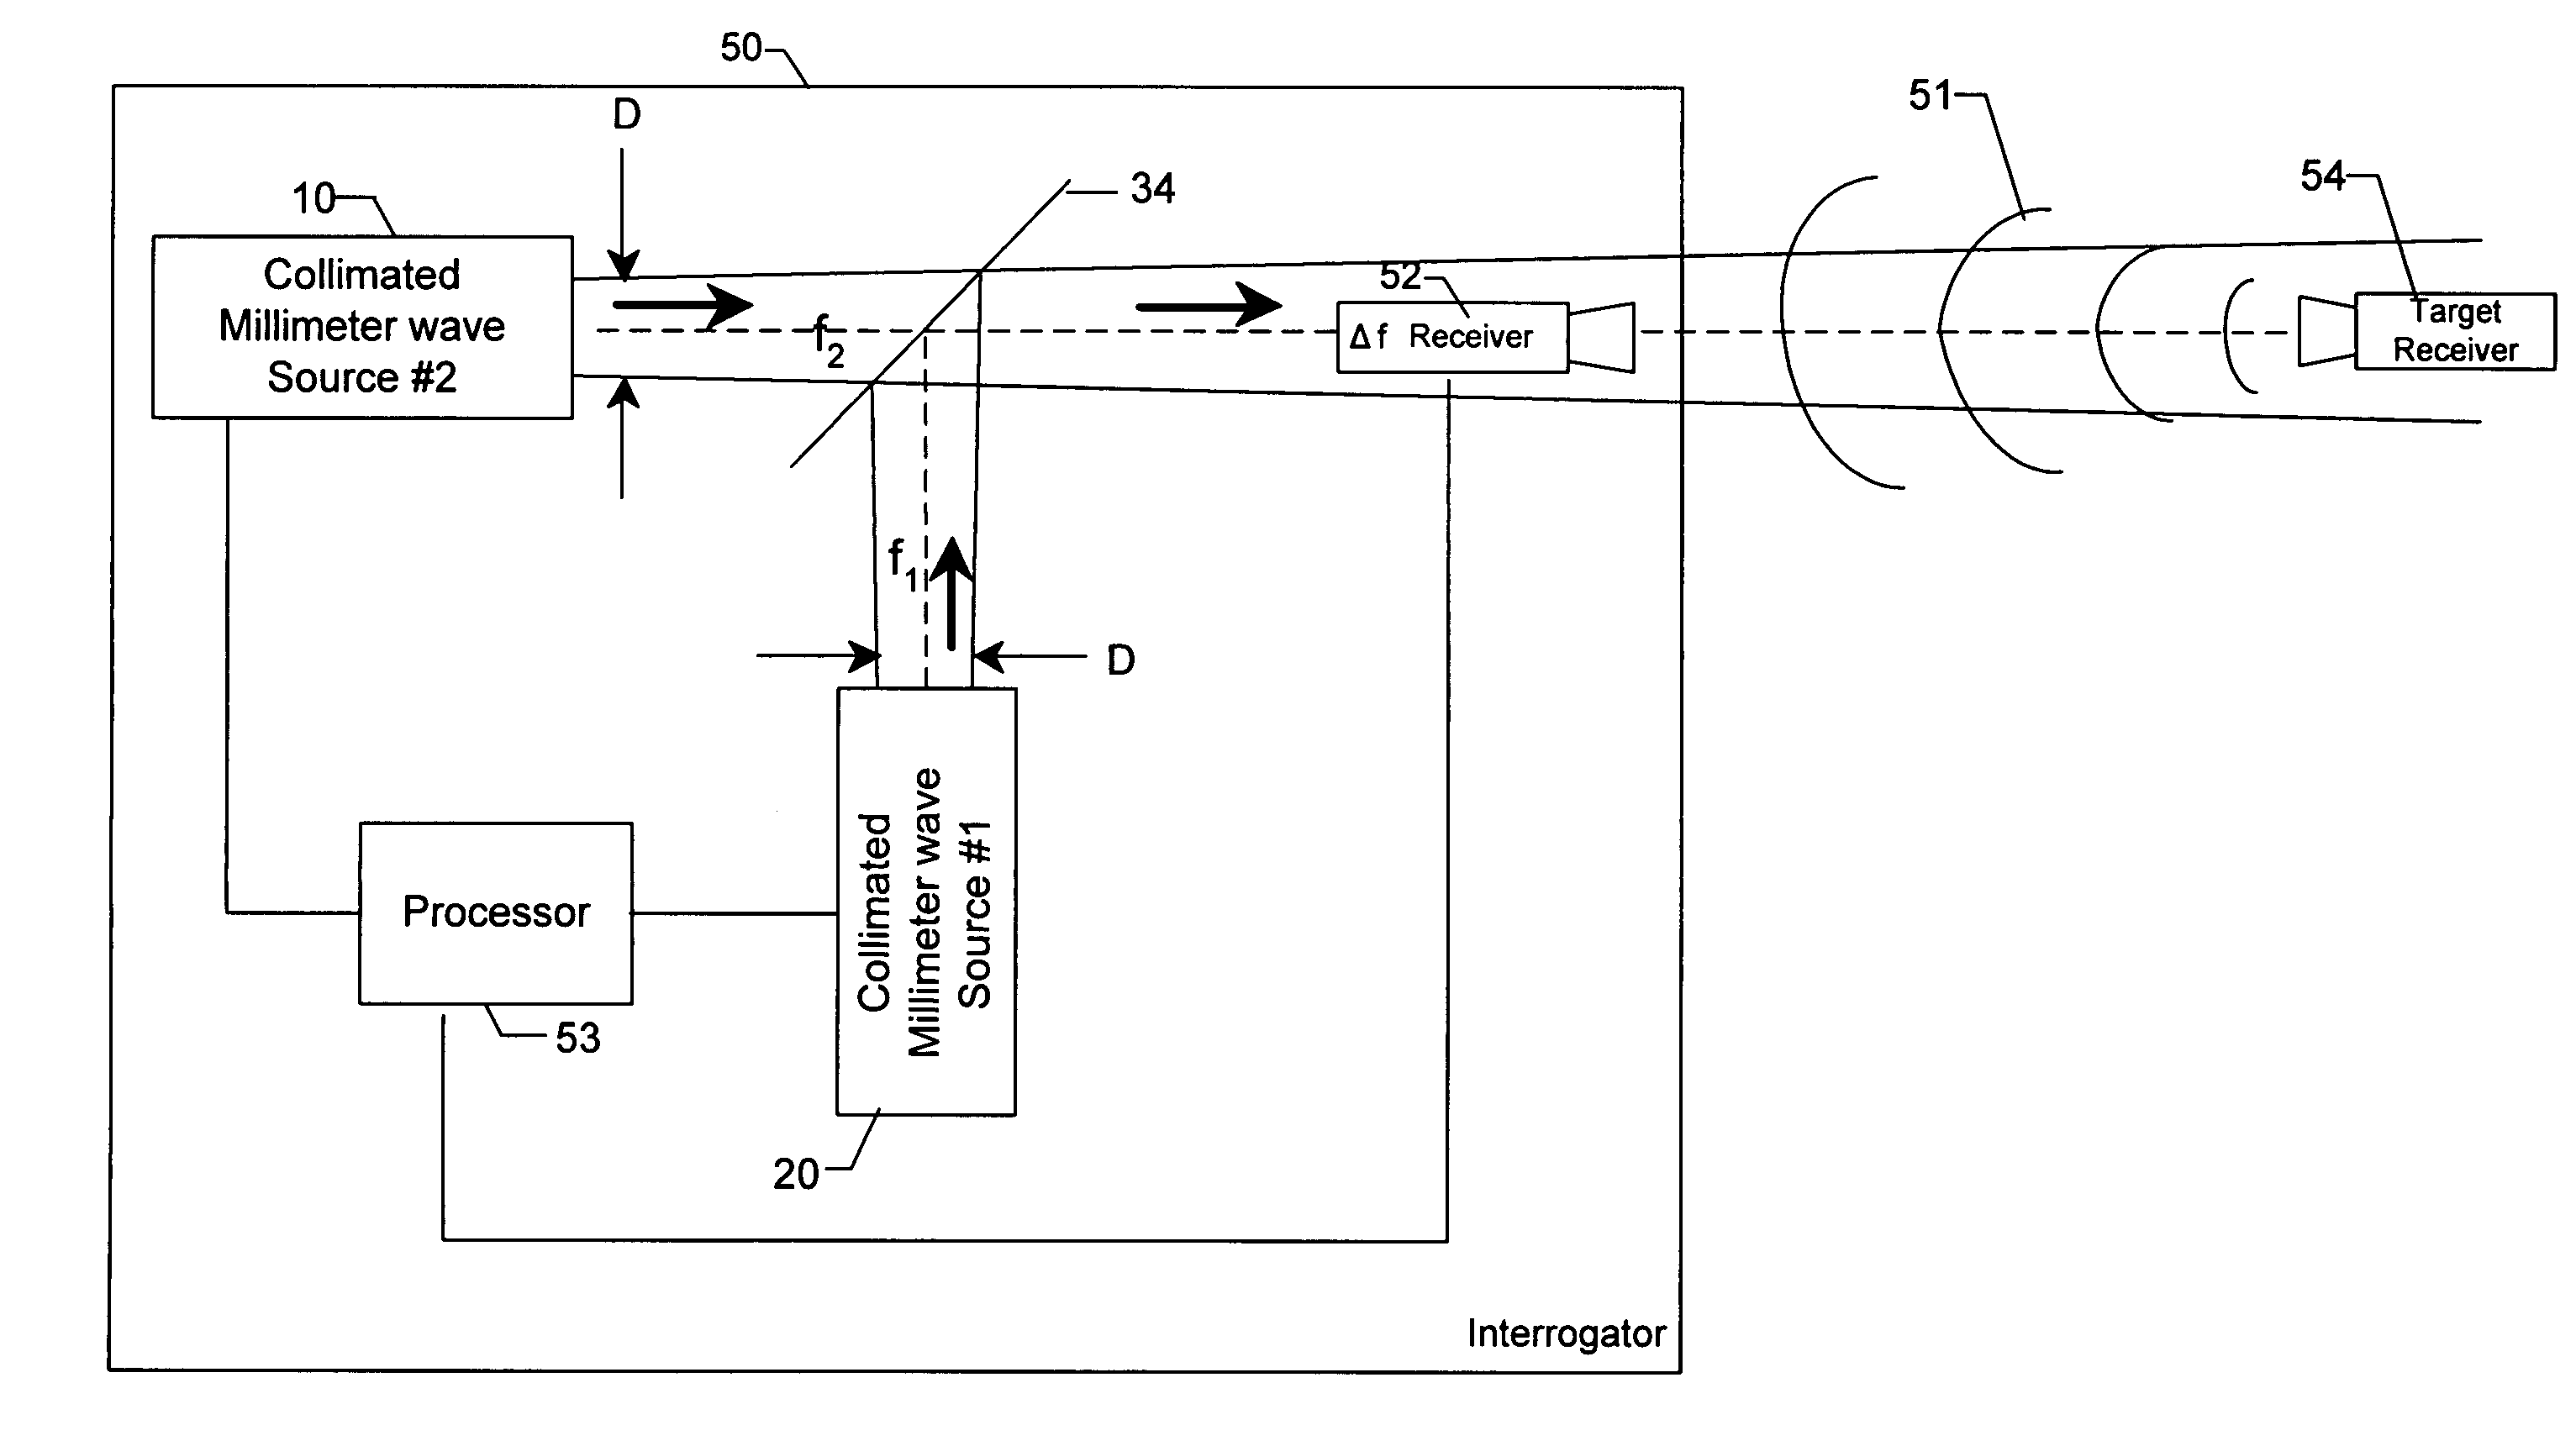 Method and apparatus for detecting, locating, and identifying microwave transmitters and receivers at distant locations